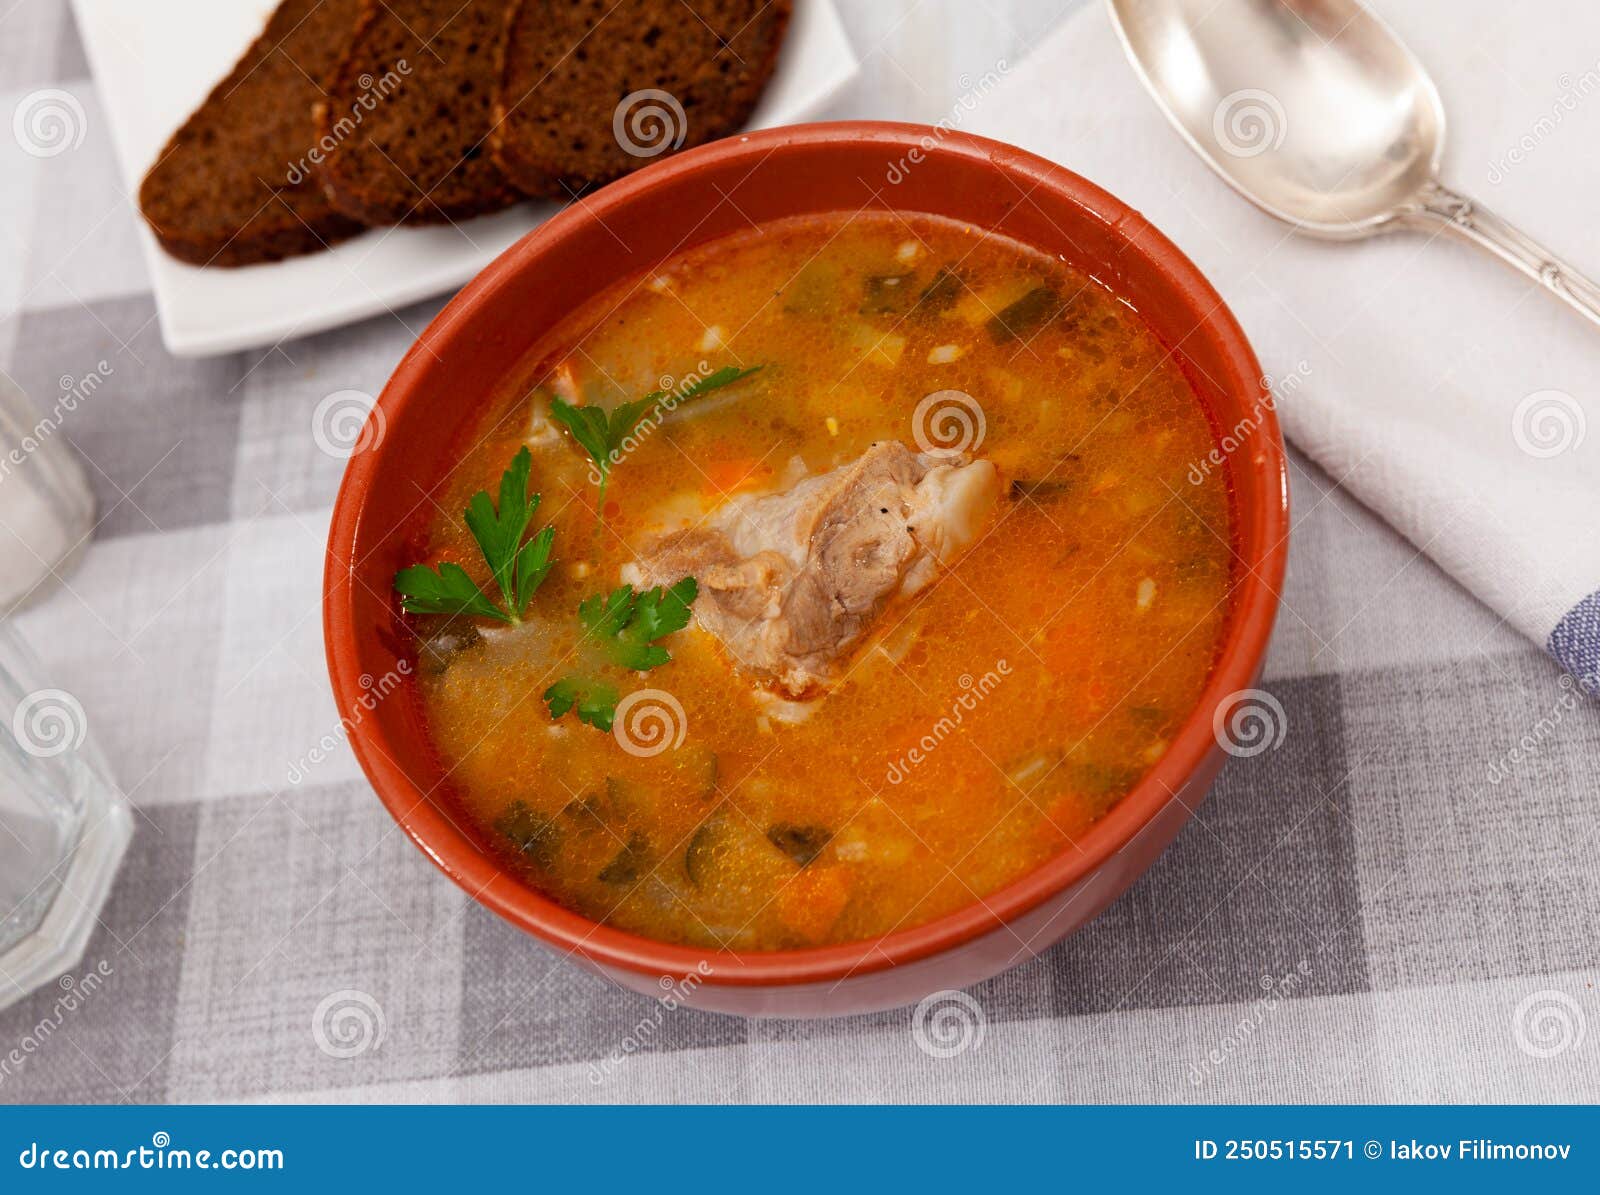 Traditional Russian Soup Rassolnik with Beef Meat Stock Image - Image ...